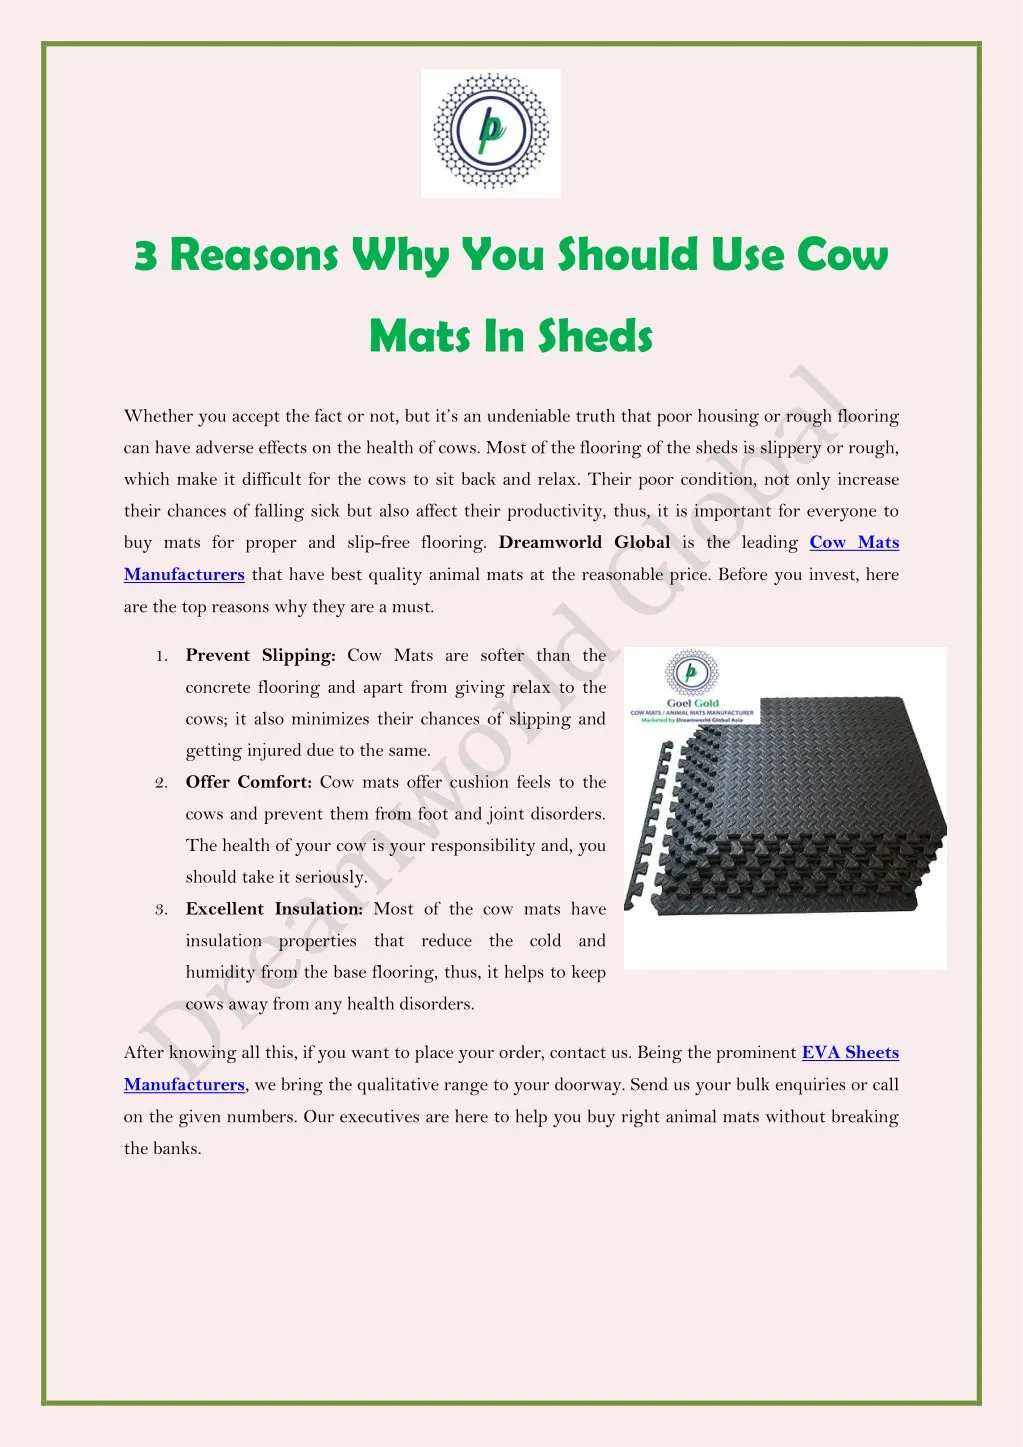 3 reasons why you should use cow